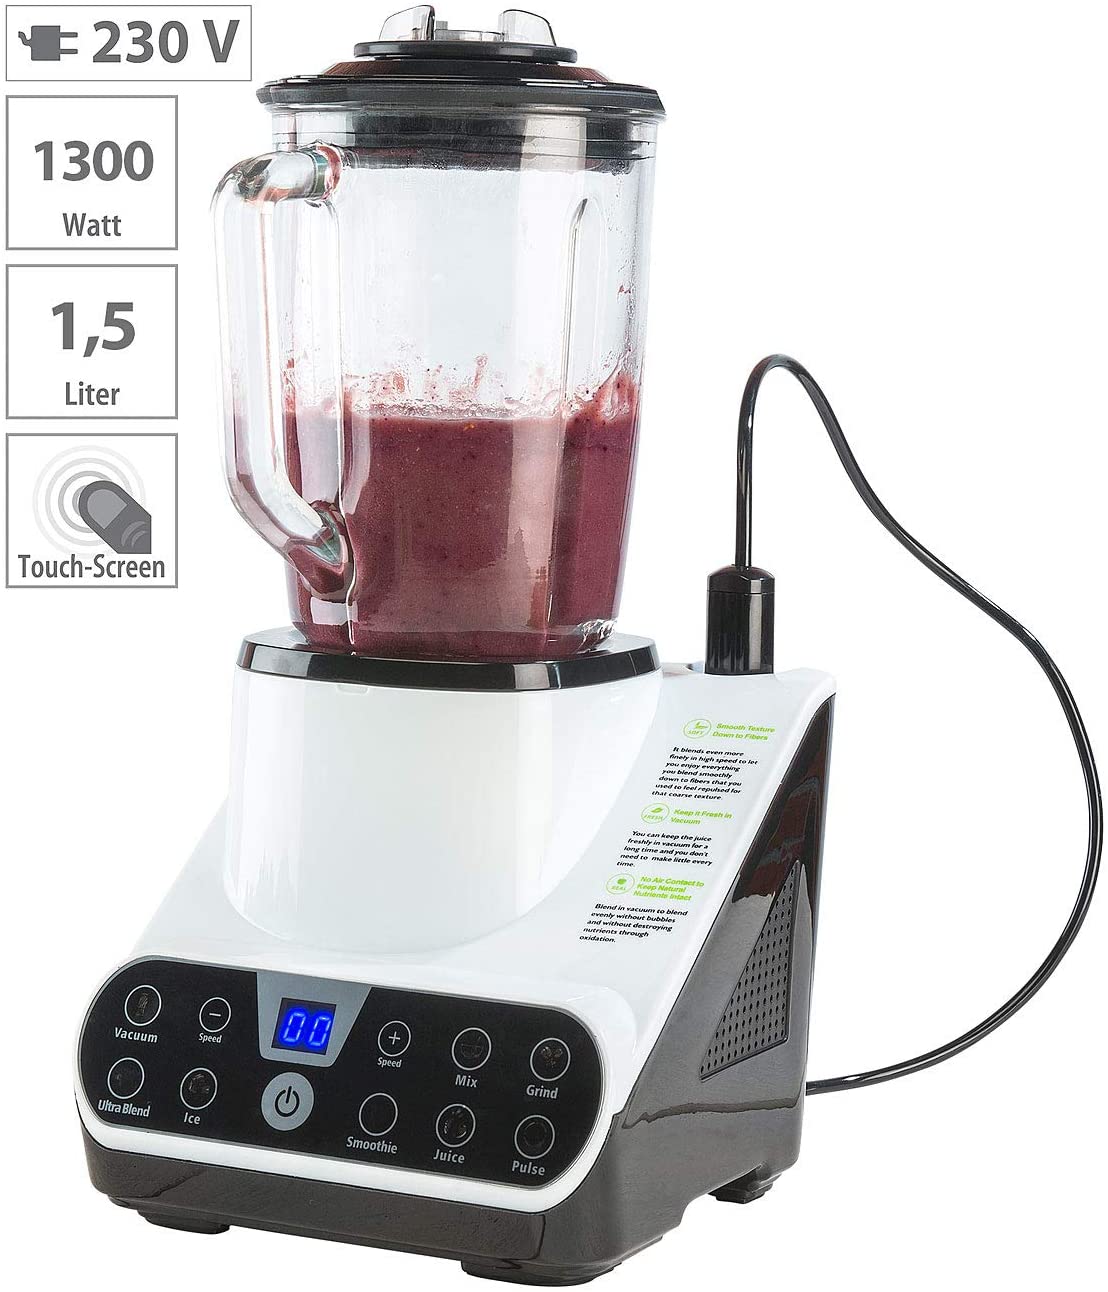 Rosenstein & Söhne Vacuum blender with vacuum function and LED touch display, 1.5 L, 1,300 W (vacuum sealer)